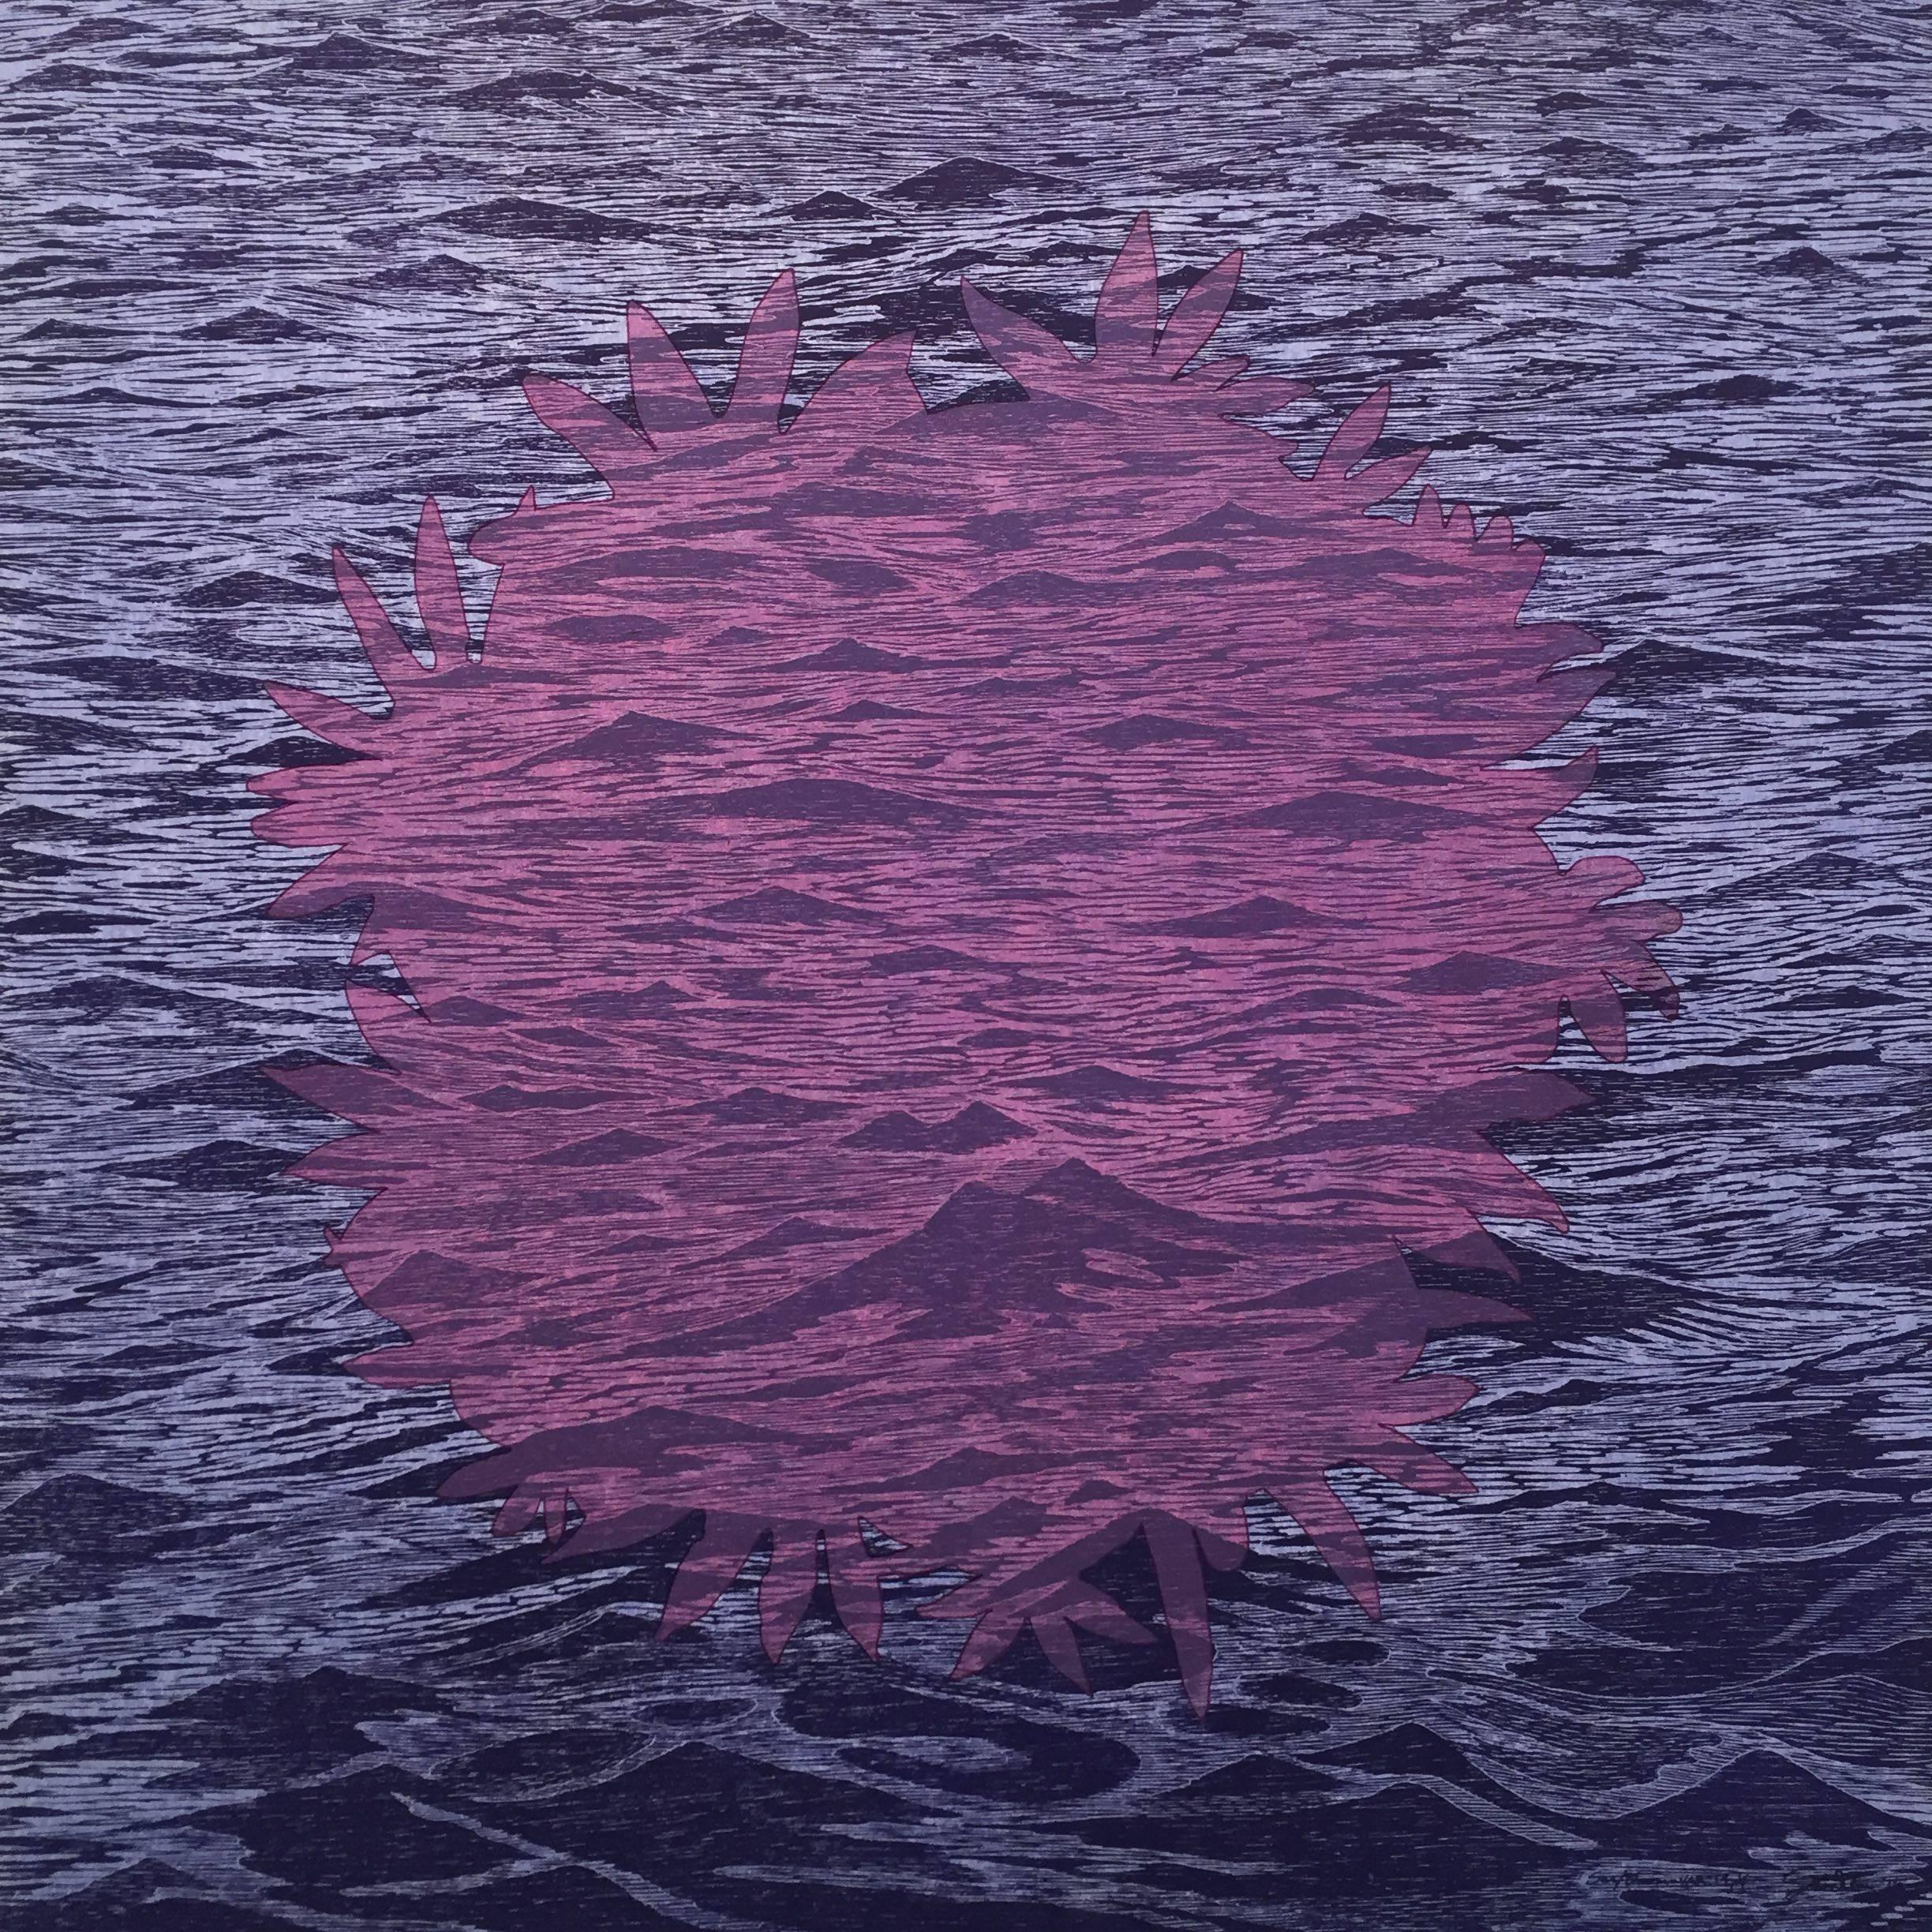 Eve Stockton Abstract Print - SeaBloom Variation 14, Woodcut, Ocean Waves and Floral Bloom, Purple and Pink